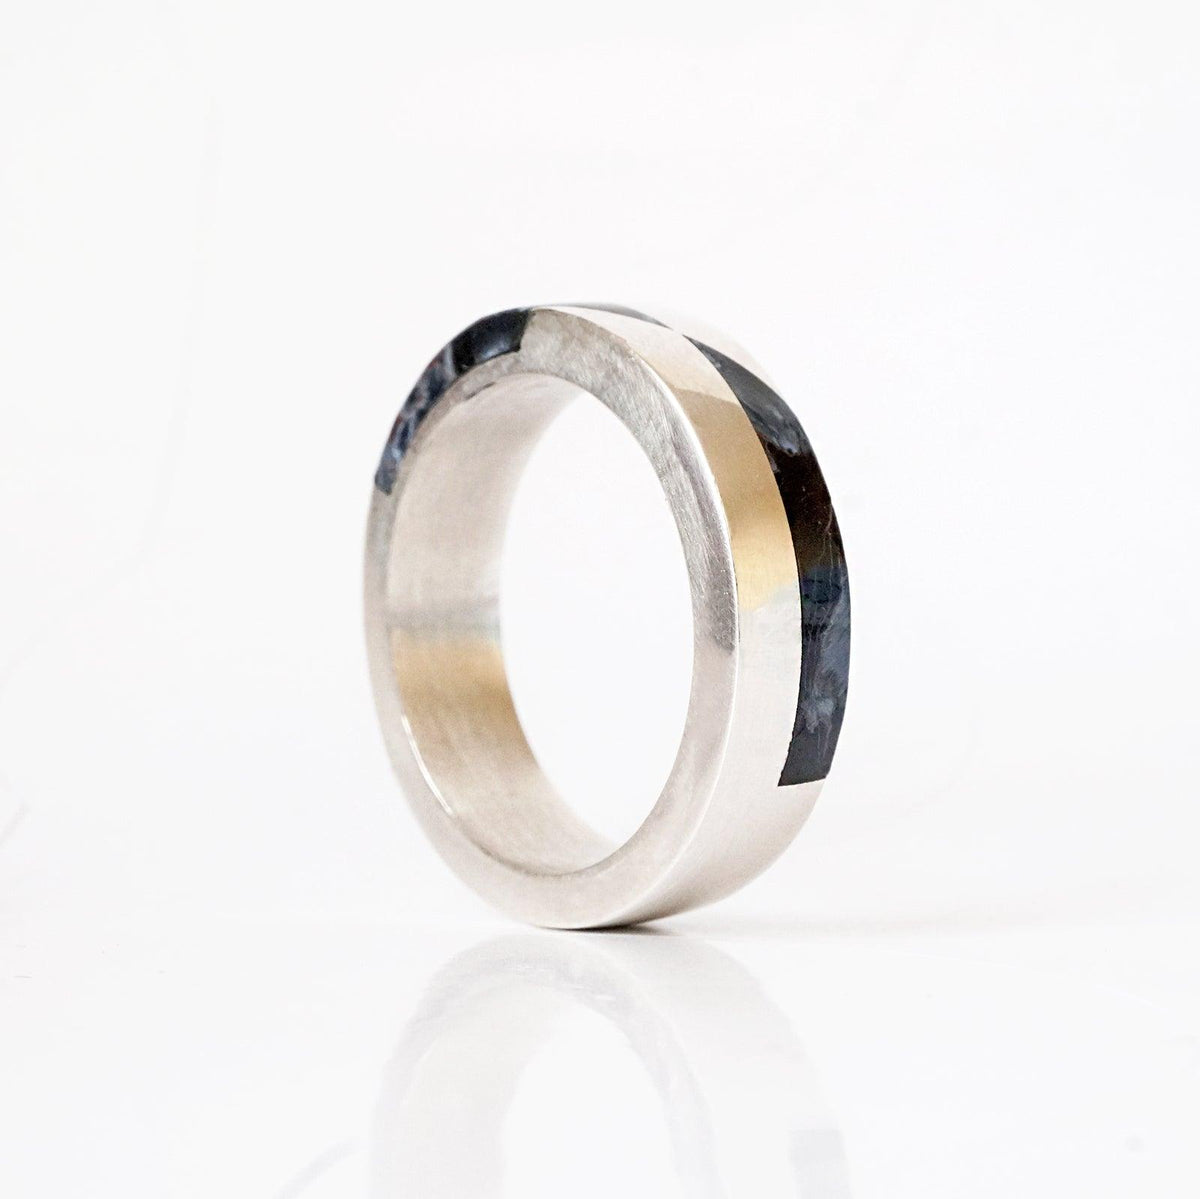 Grid Pietersite Ring in Sterling Silver and 14K Gold, 5.8mm - Tippy Taste Jewelry